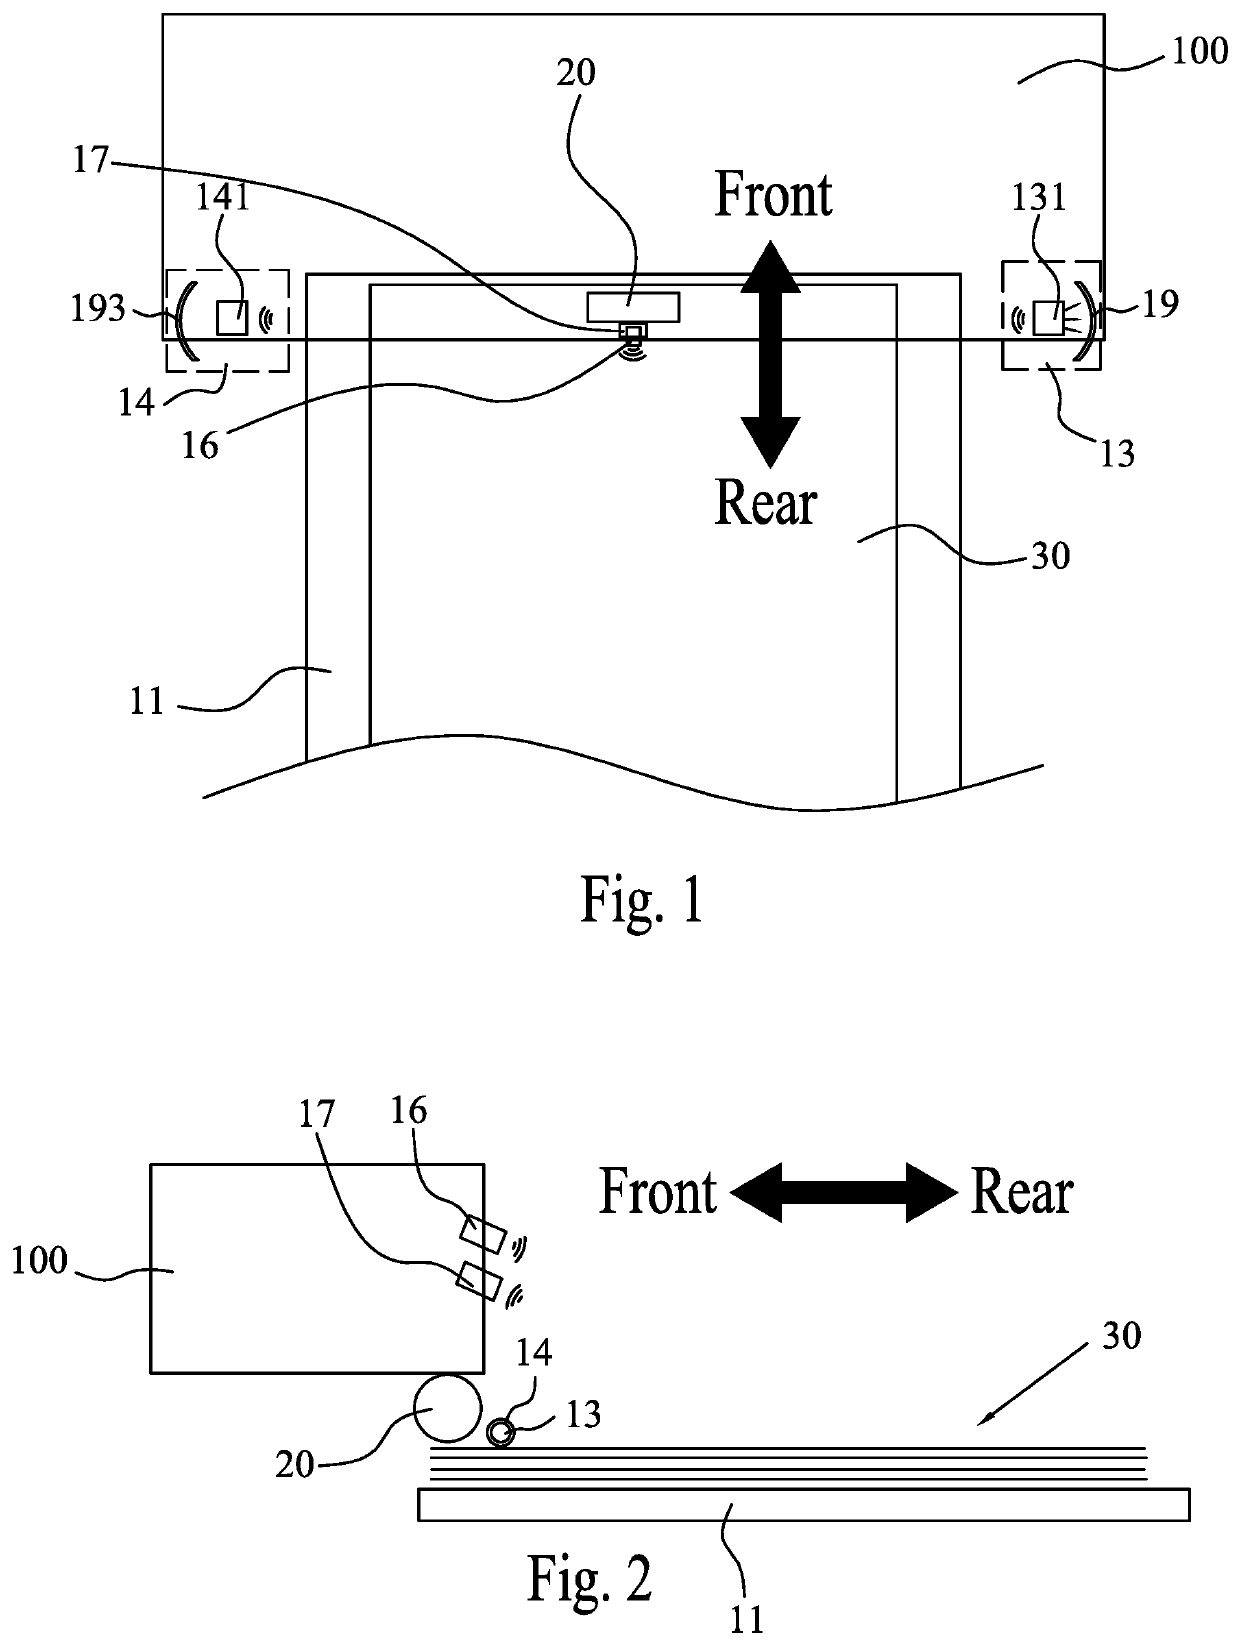 Paper warping detection device